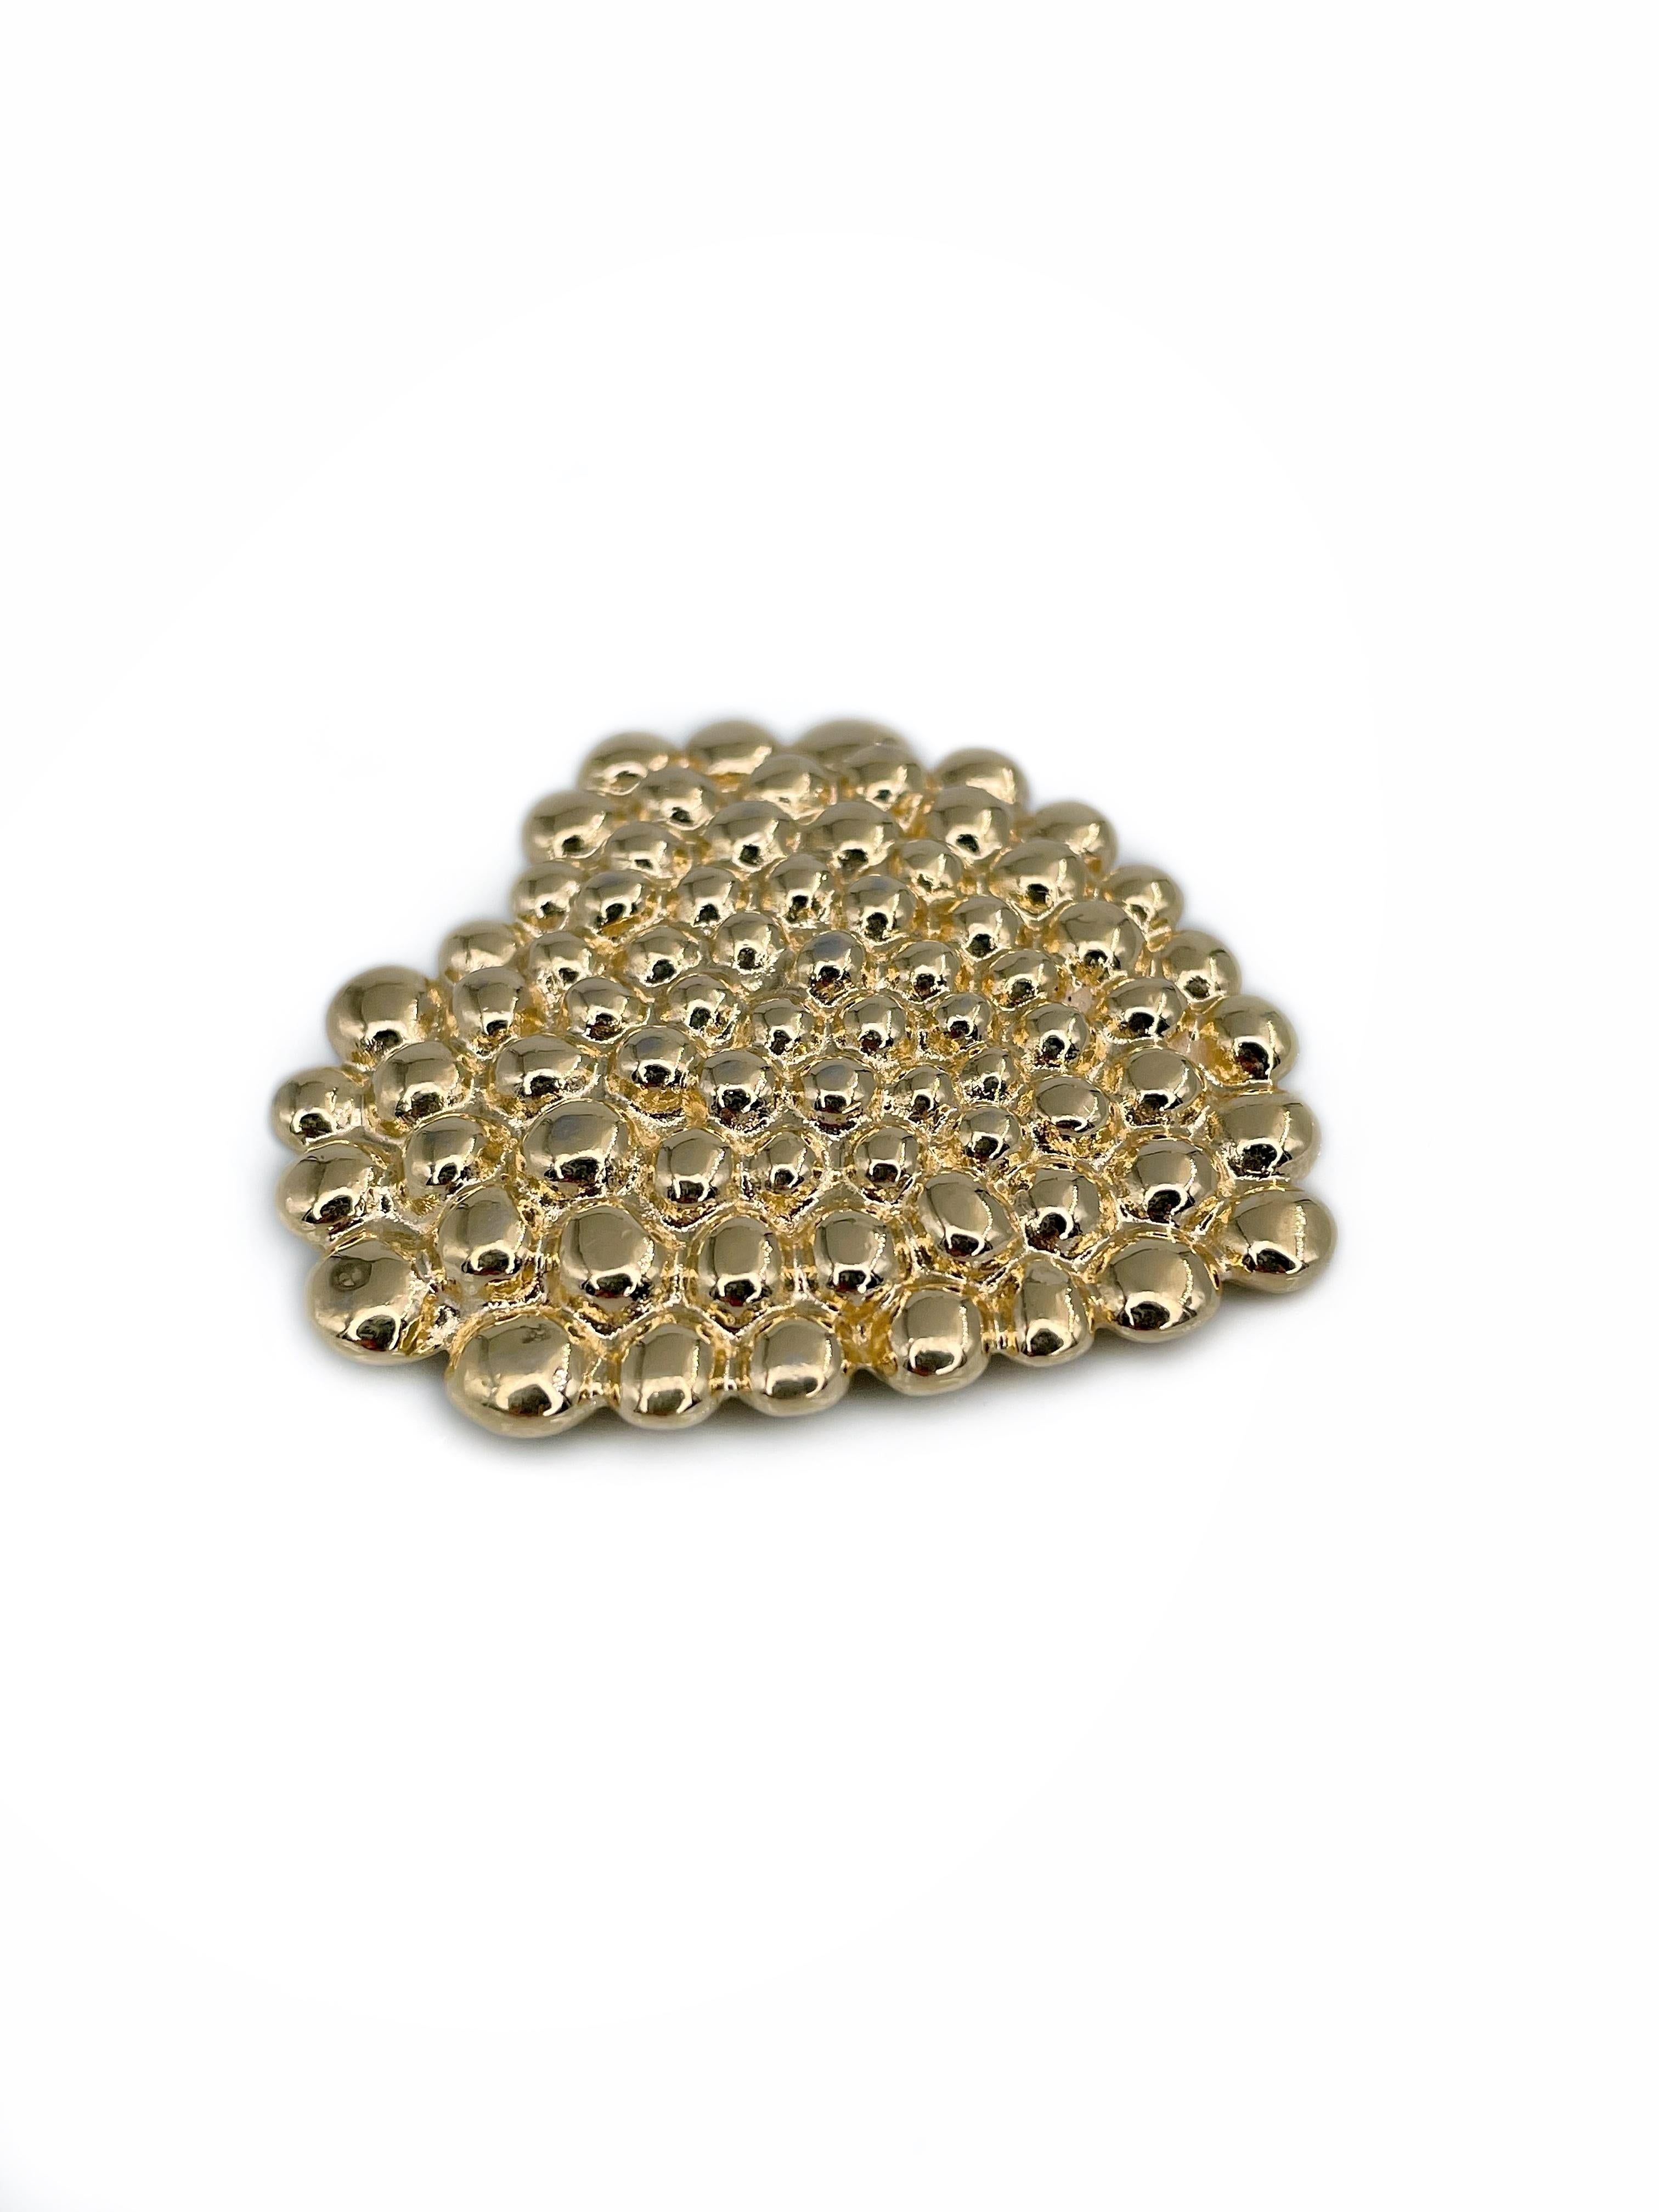 This is a gold tone bubble pattern heart brooch designed by YSL in 1990’s. The piece is gold plated. 

Signed: “YSL. Made in France” (shown in photos).

Size: 4.5x4.7cm

———

If you have any questions, please feel free to ask. We describe our items